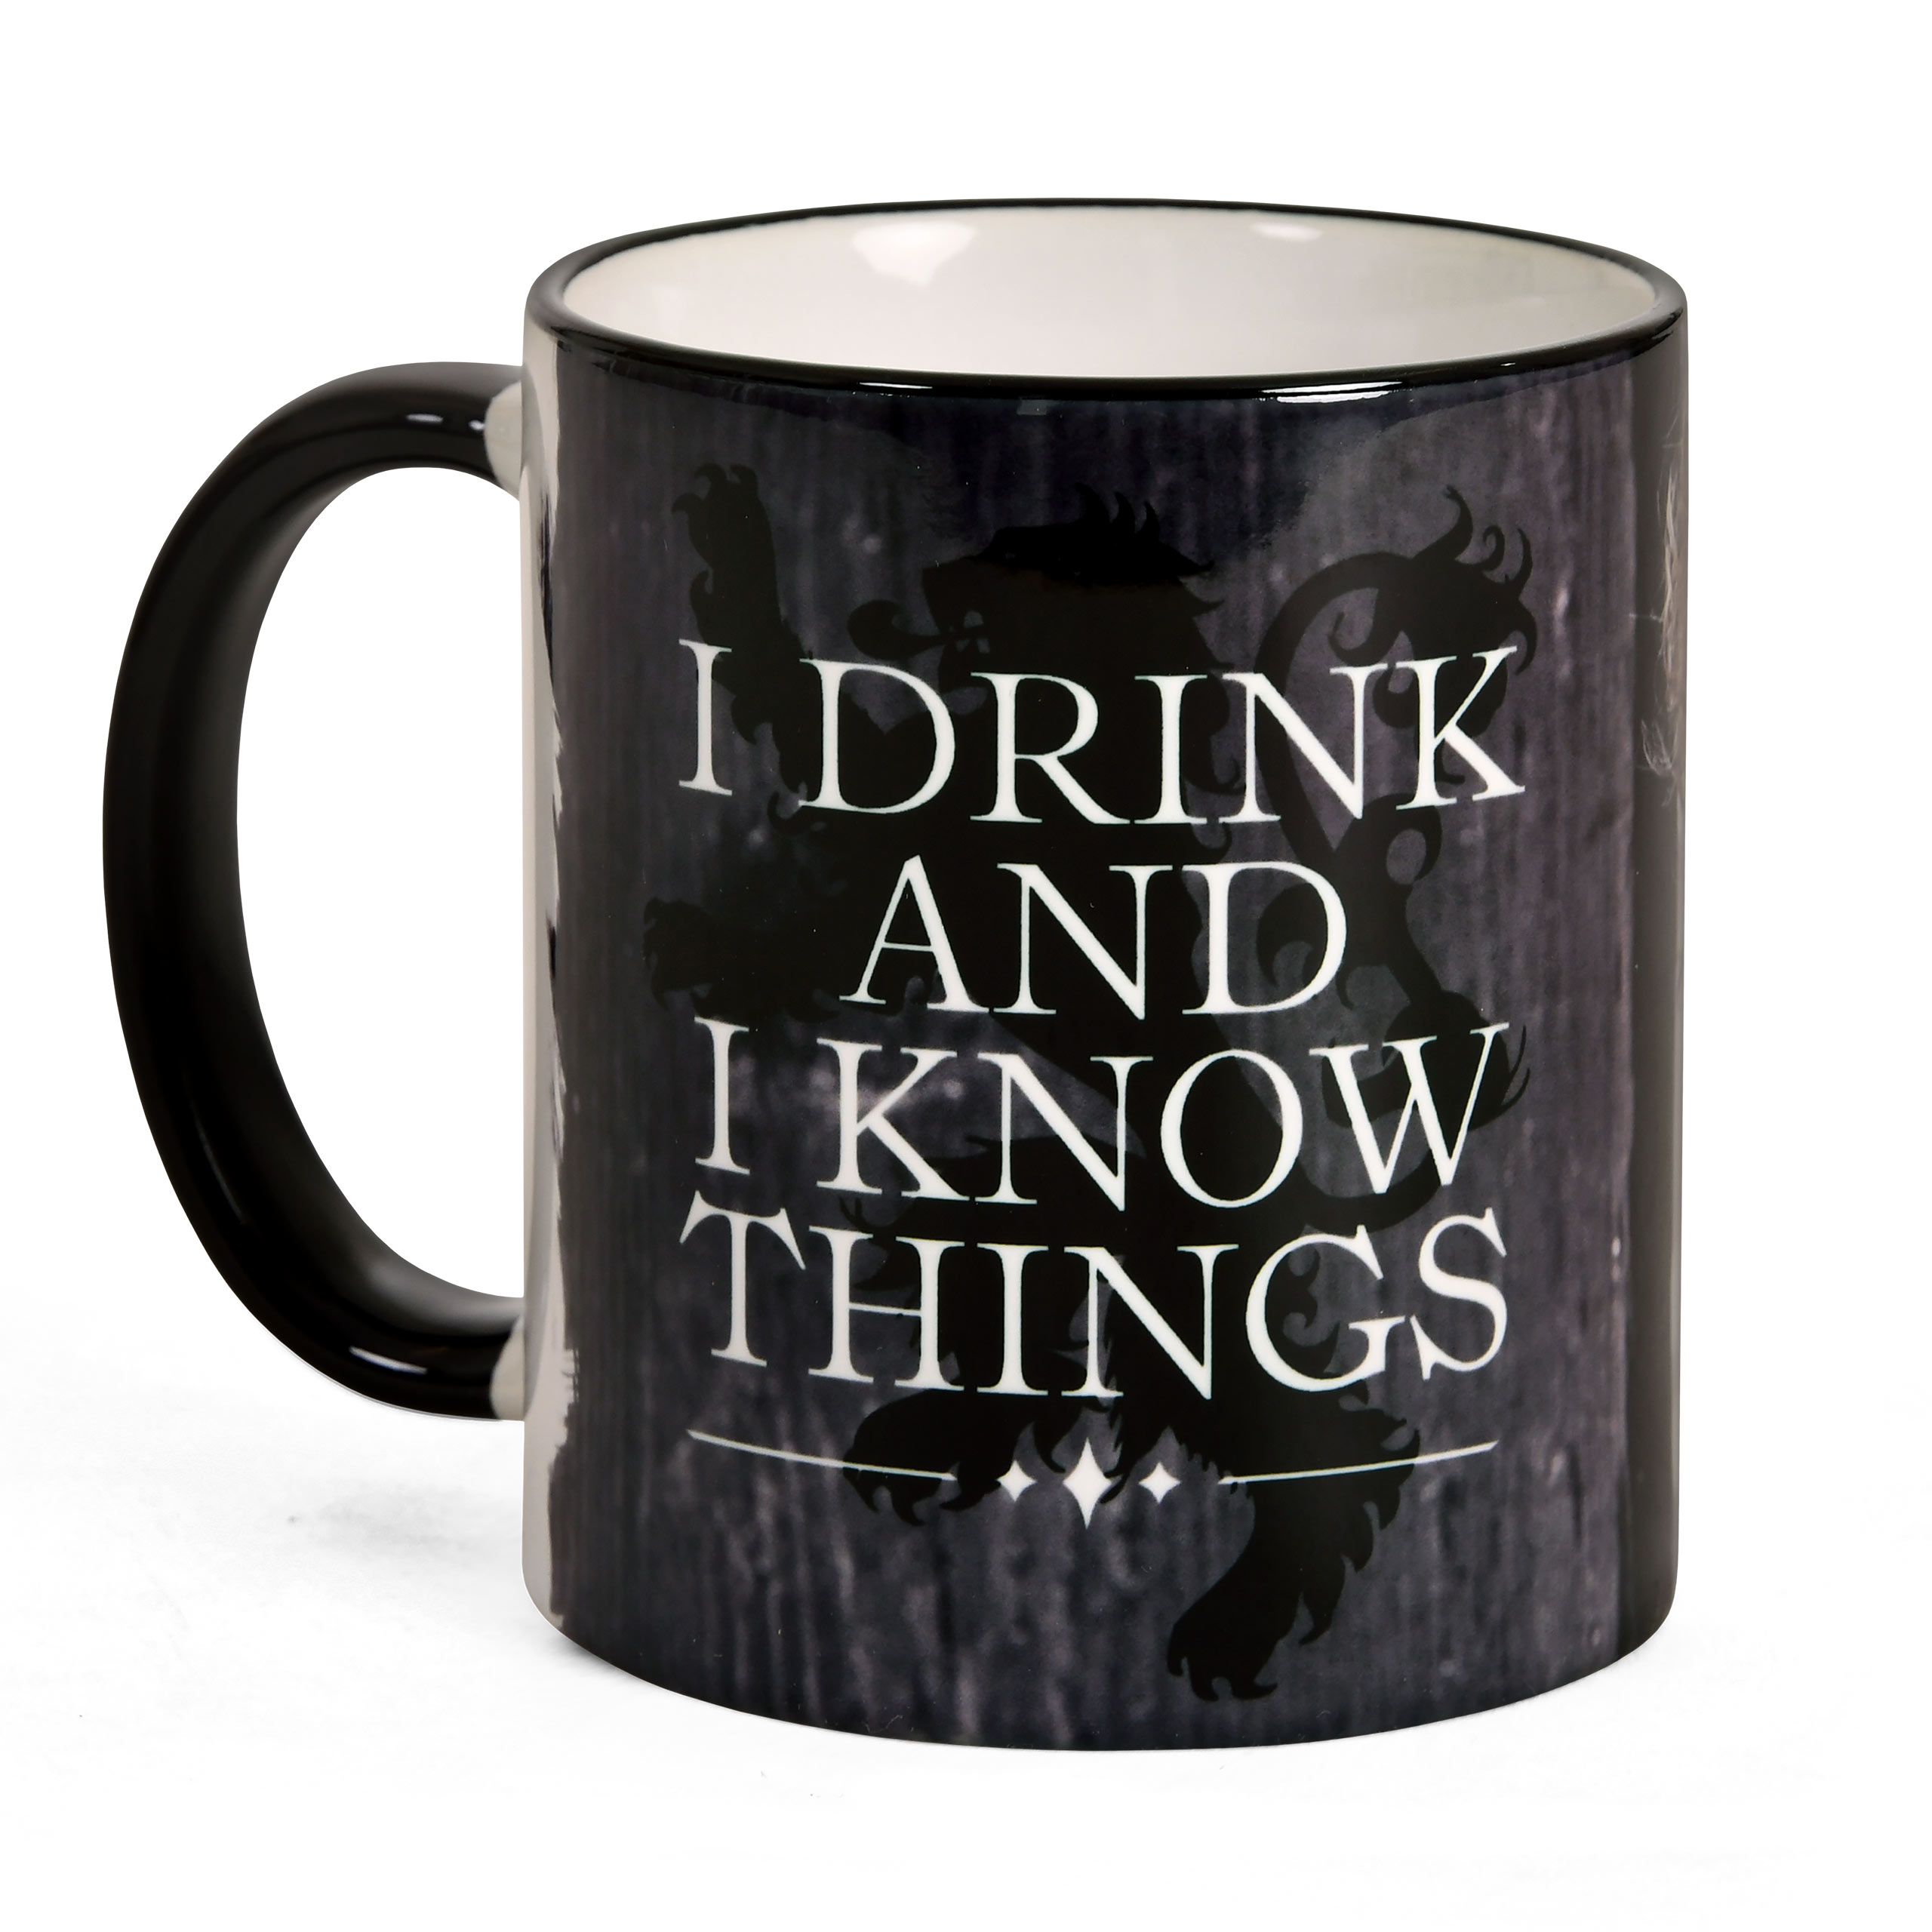 Game of Thrones - Tyrion Lannister Tasse - Quote Line